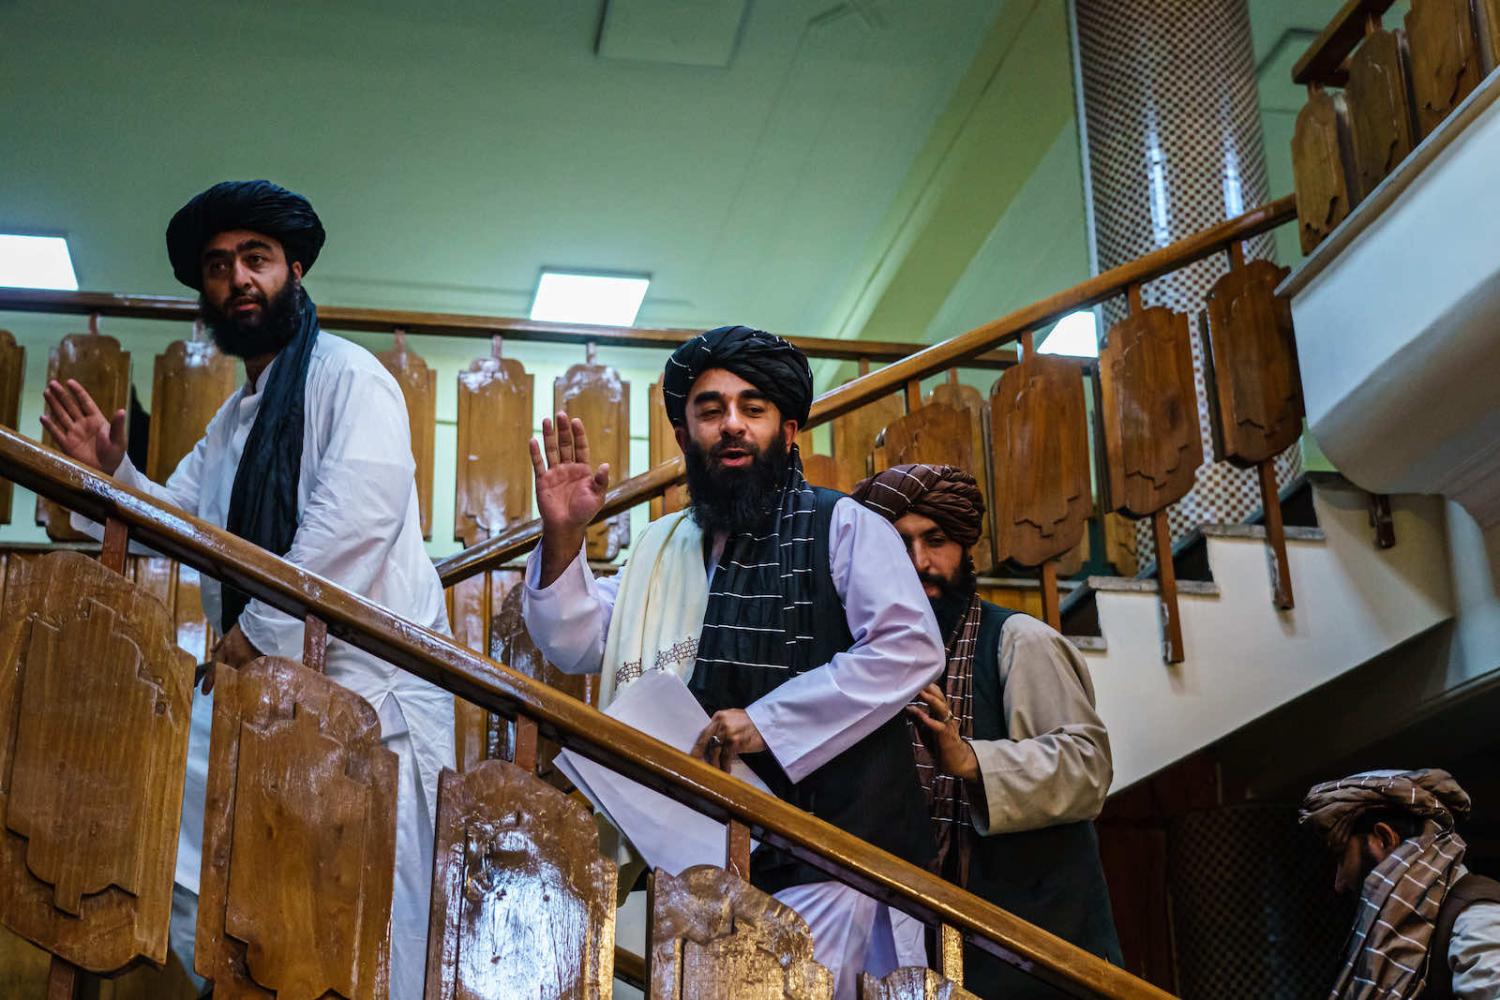 Taliban spokesman Zabihullah Mujahid makes his first-ever public appearance to address concerns about the Taliban’s reputation with human and civil rights during a press conference in Kabul, Afghanistan (Marcus Yam/Los Angeles Times via Getty Images)